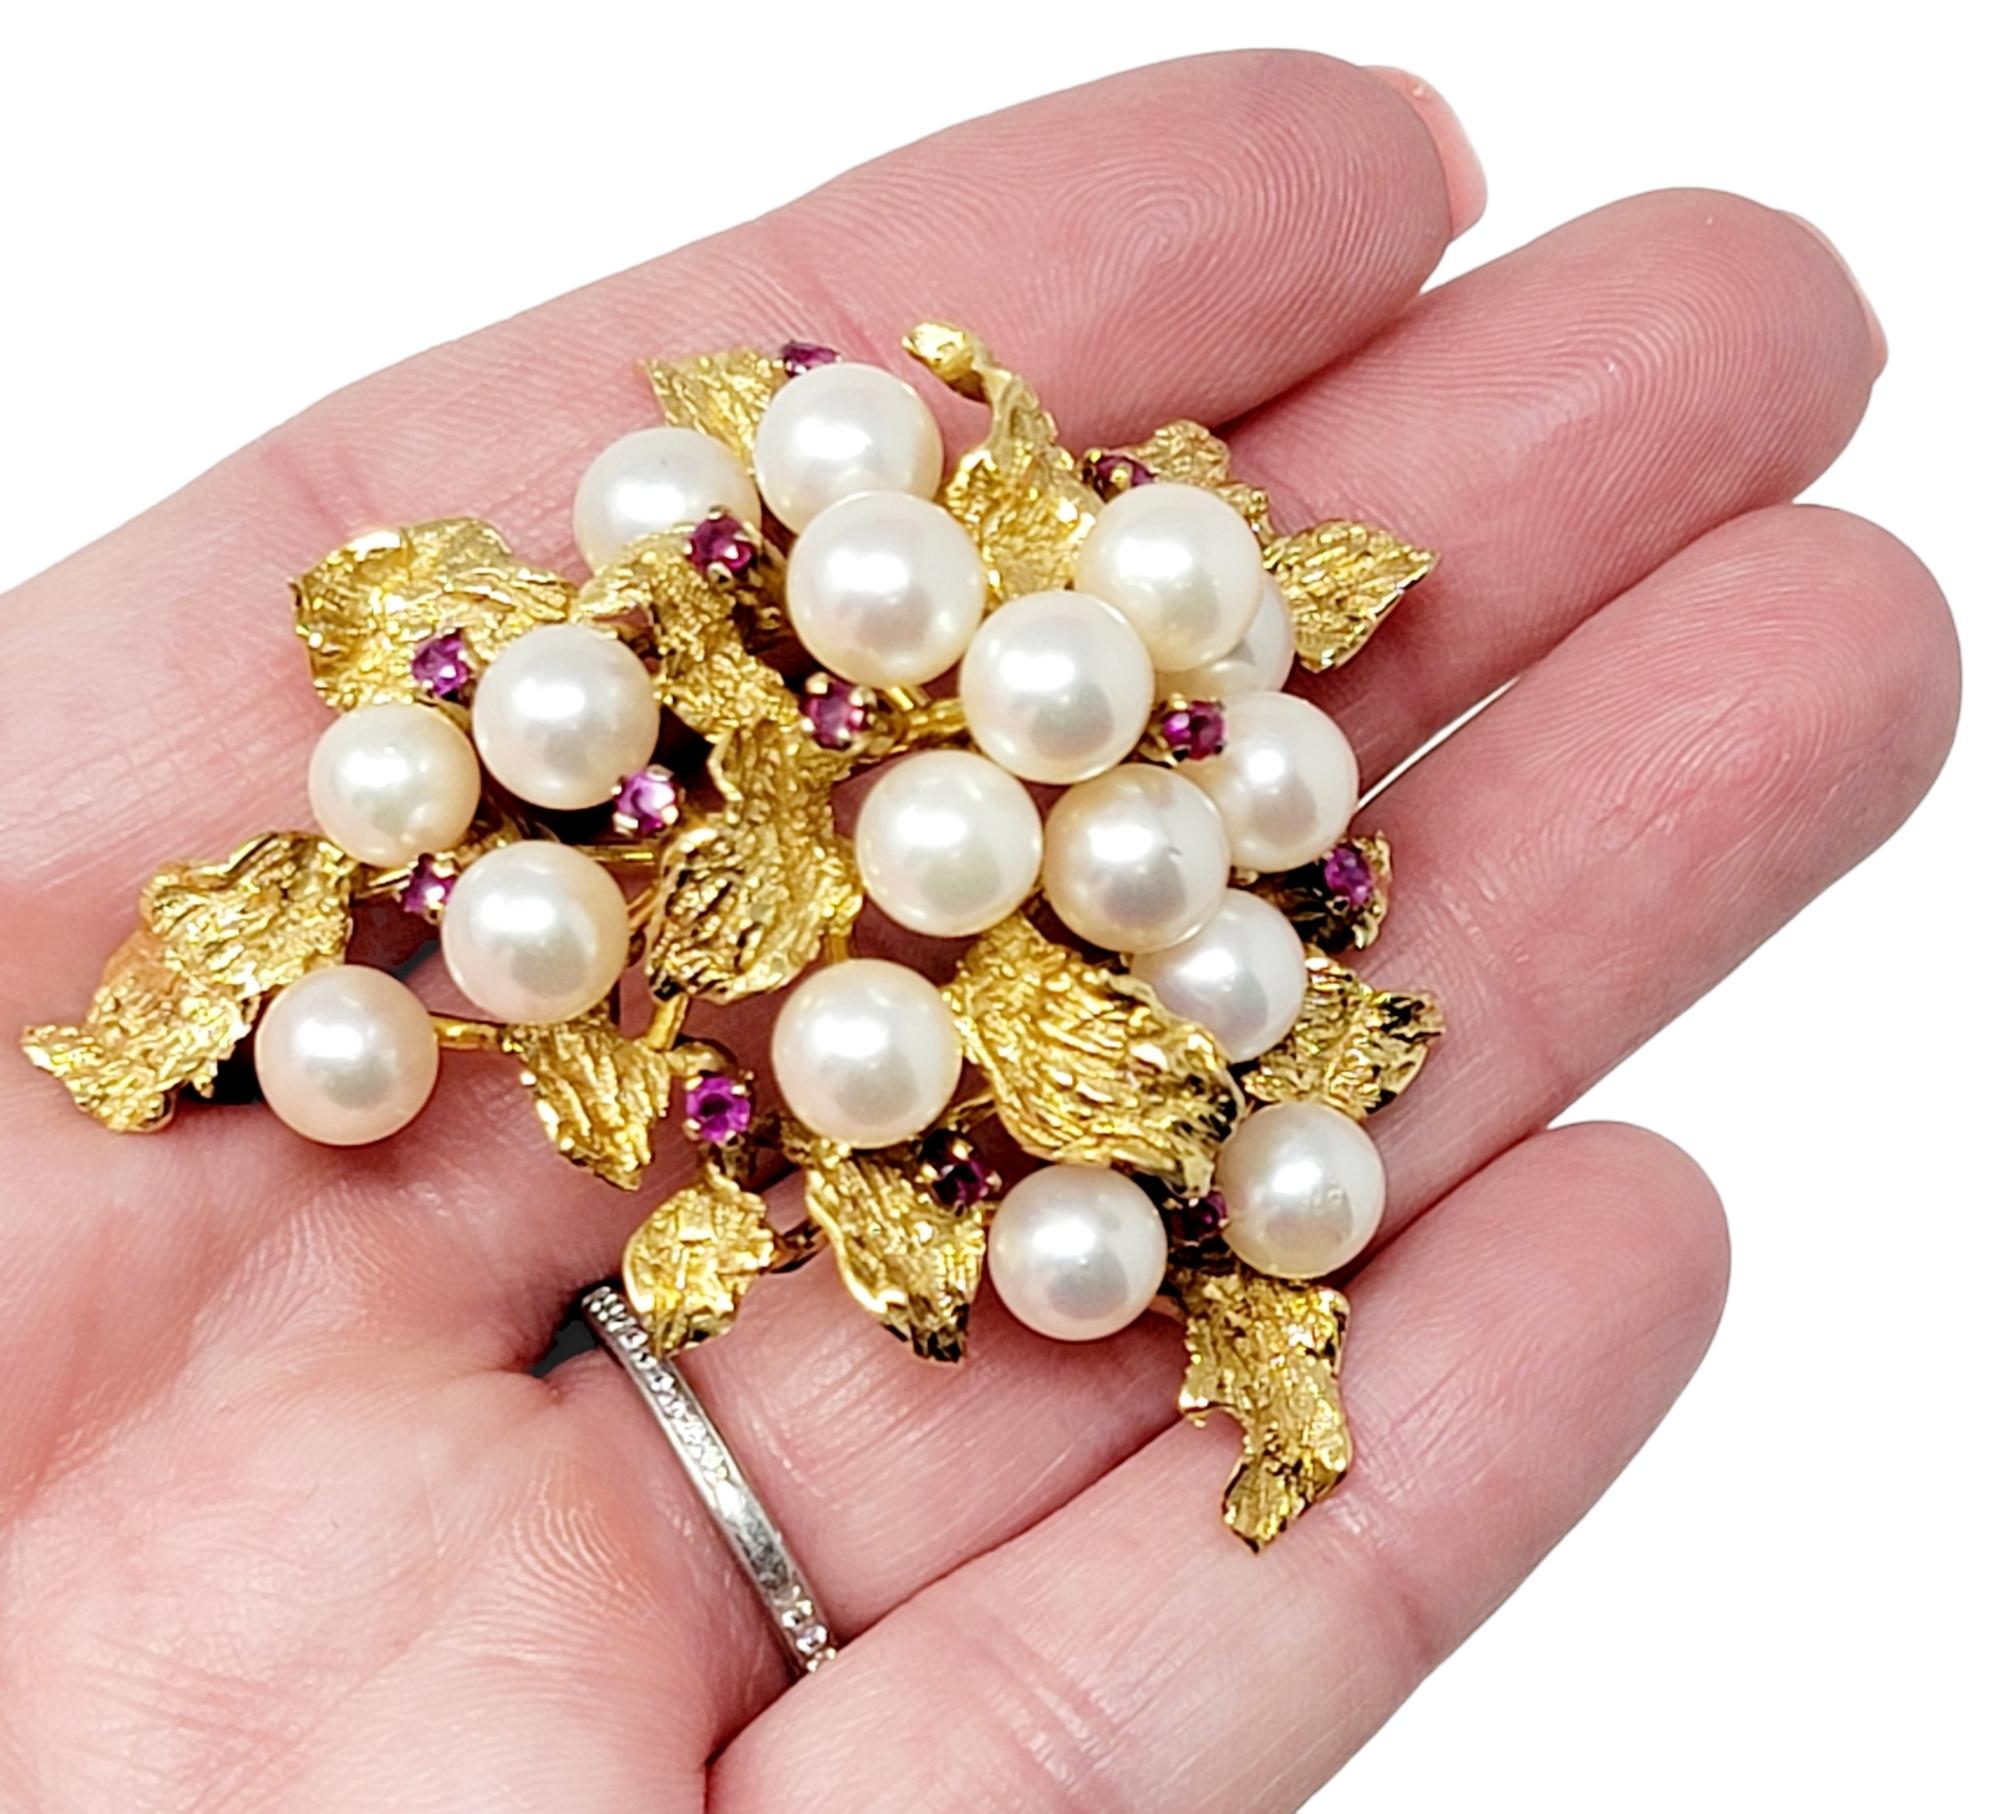 Exquisite vintage pearl and ruby brooch will elevate any item it is paired with. The ultra feminine design absolutely radiates, offering sparkle, shine and sophistication. This gorgeous brooch is made of 14 karat yellow  gold and arranged in a